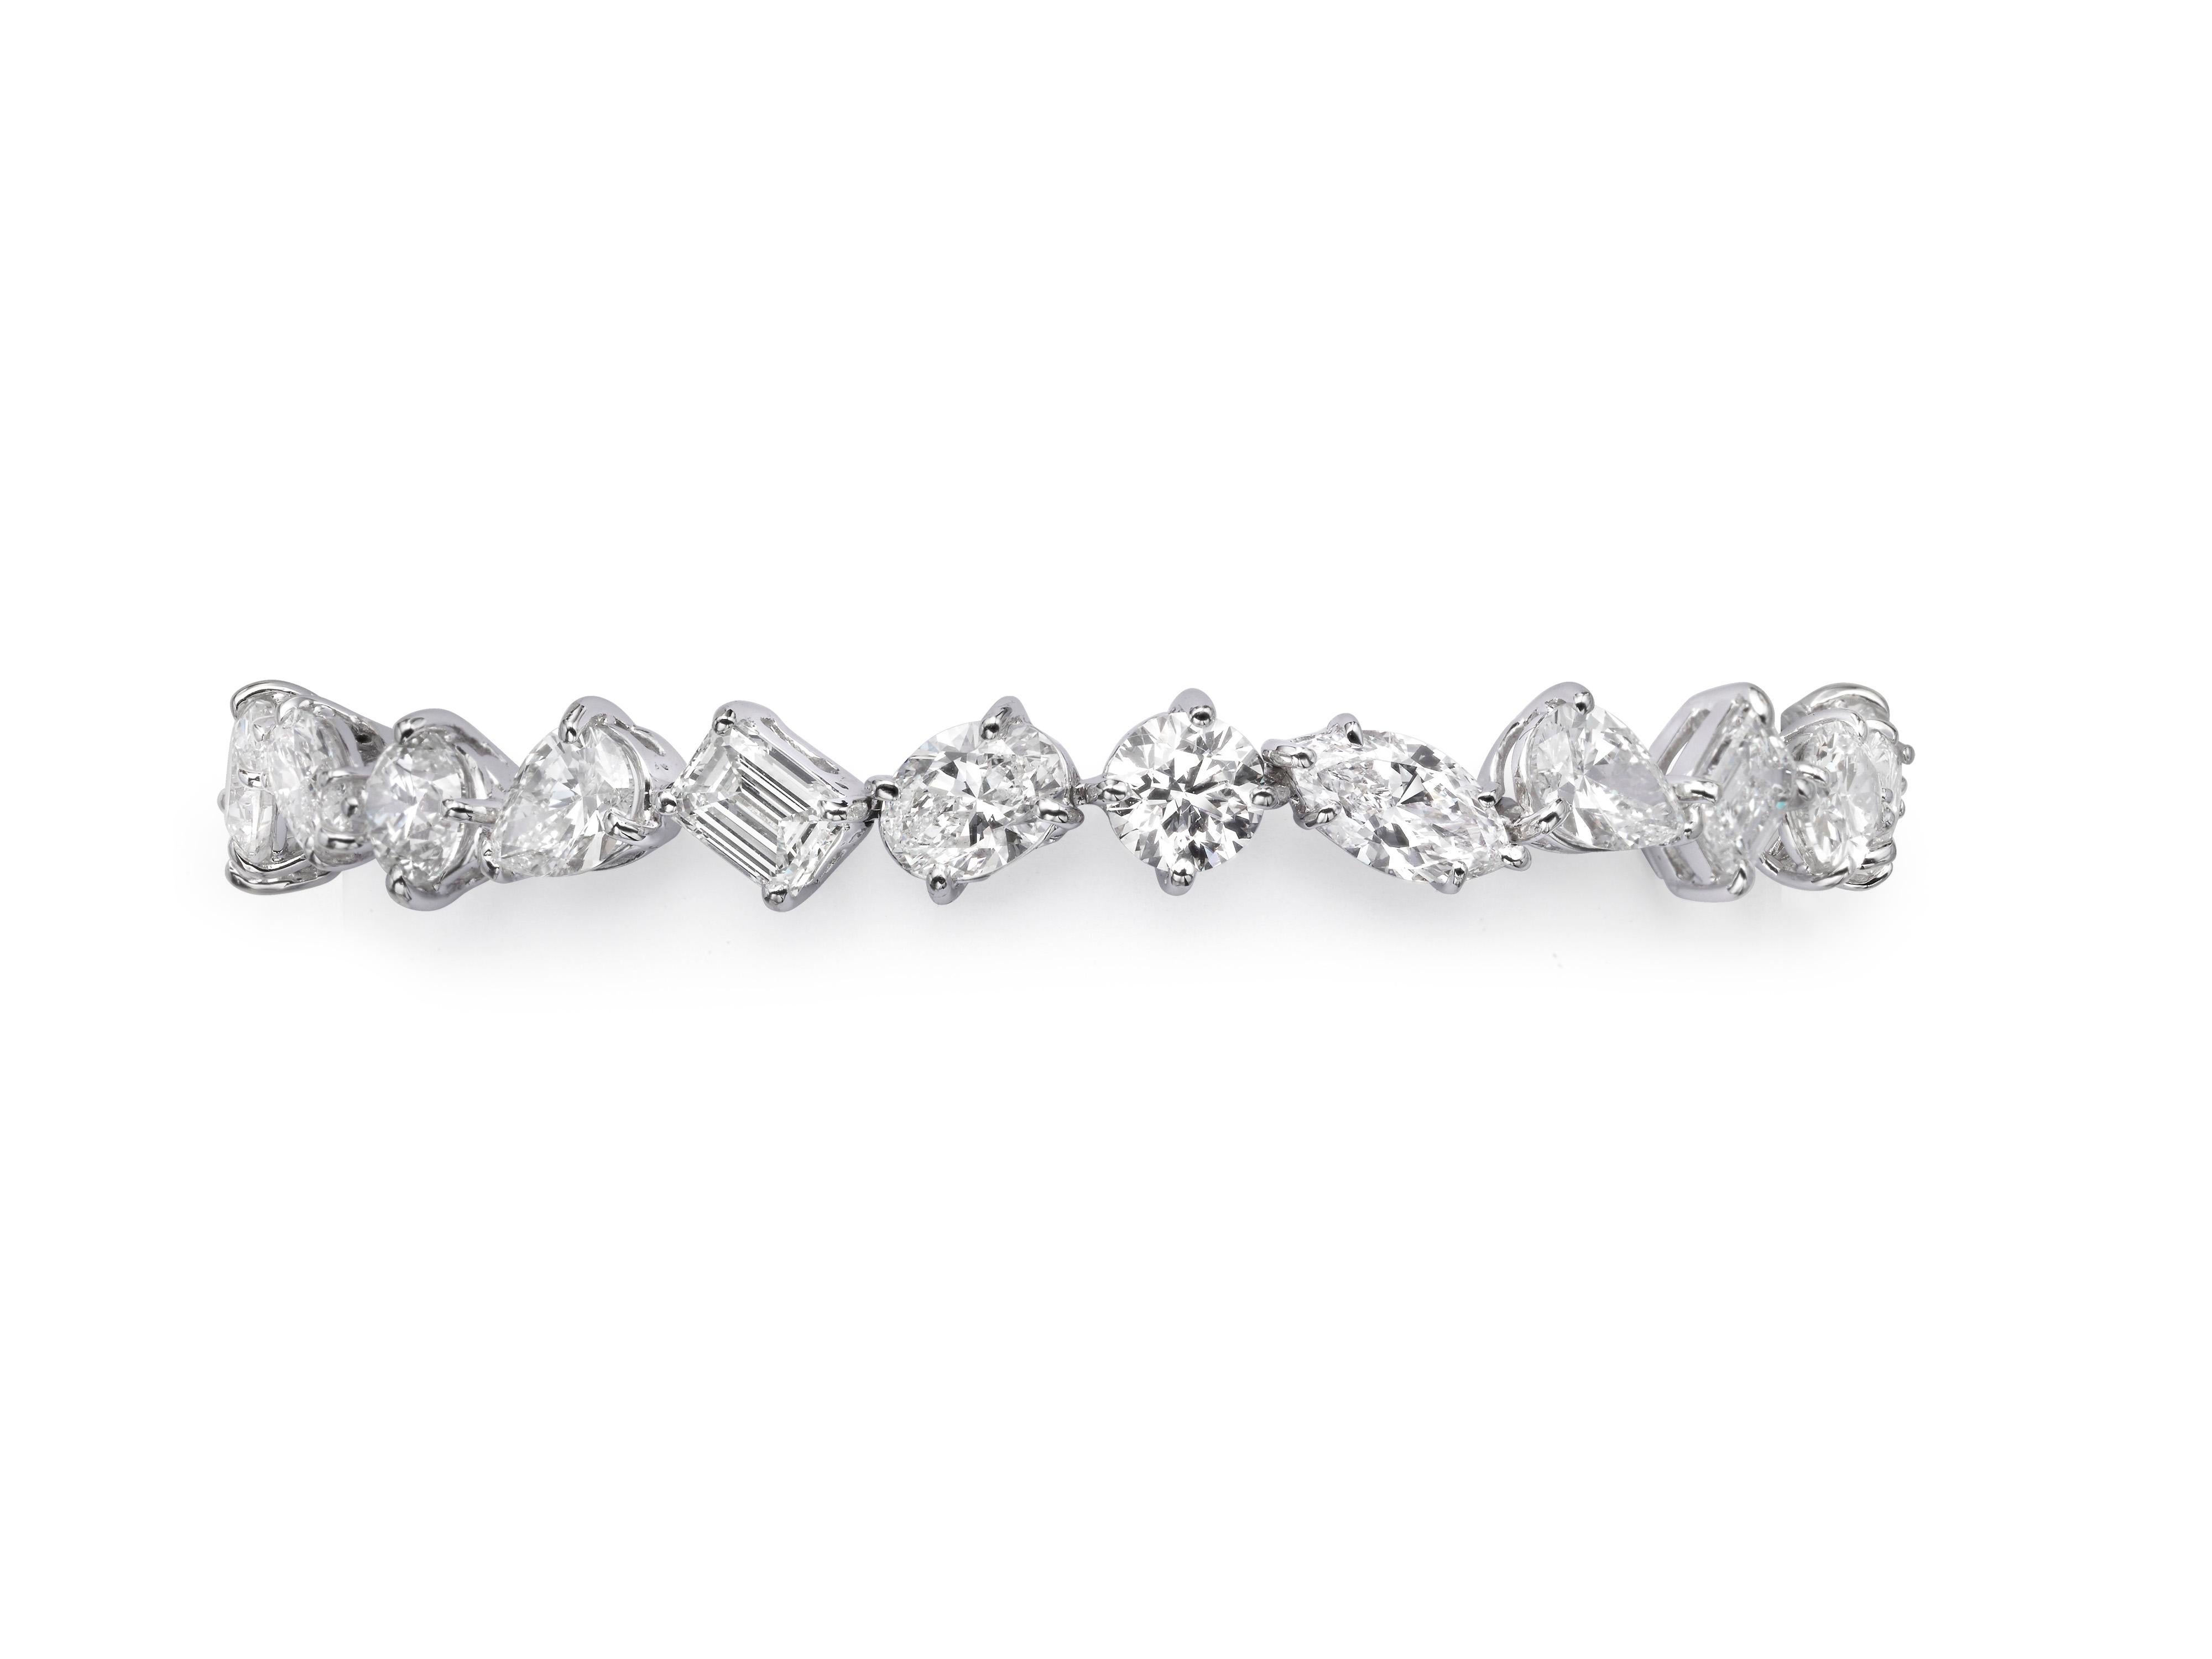 Butani's 17.16 carat multi shape diamond tennis bracelet features 24 fancy cut diamonds including round brilliant, emerald, marquise, oval and pear.  Perfect as a bridal piece worn with an engagement ring or alone as a statement.  Each diamond is